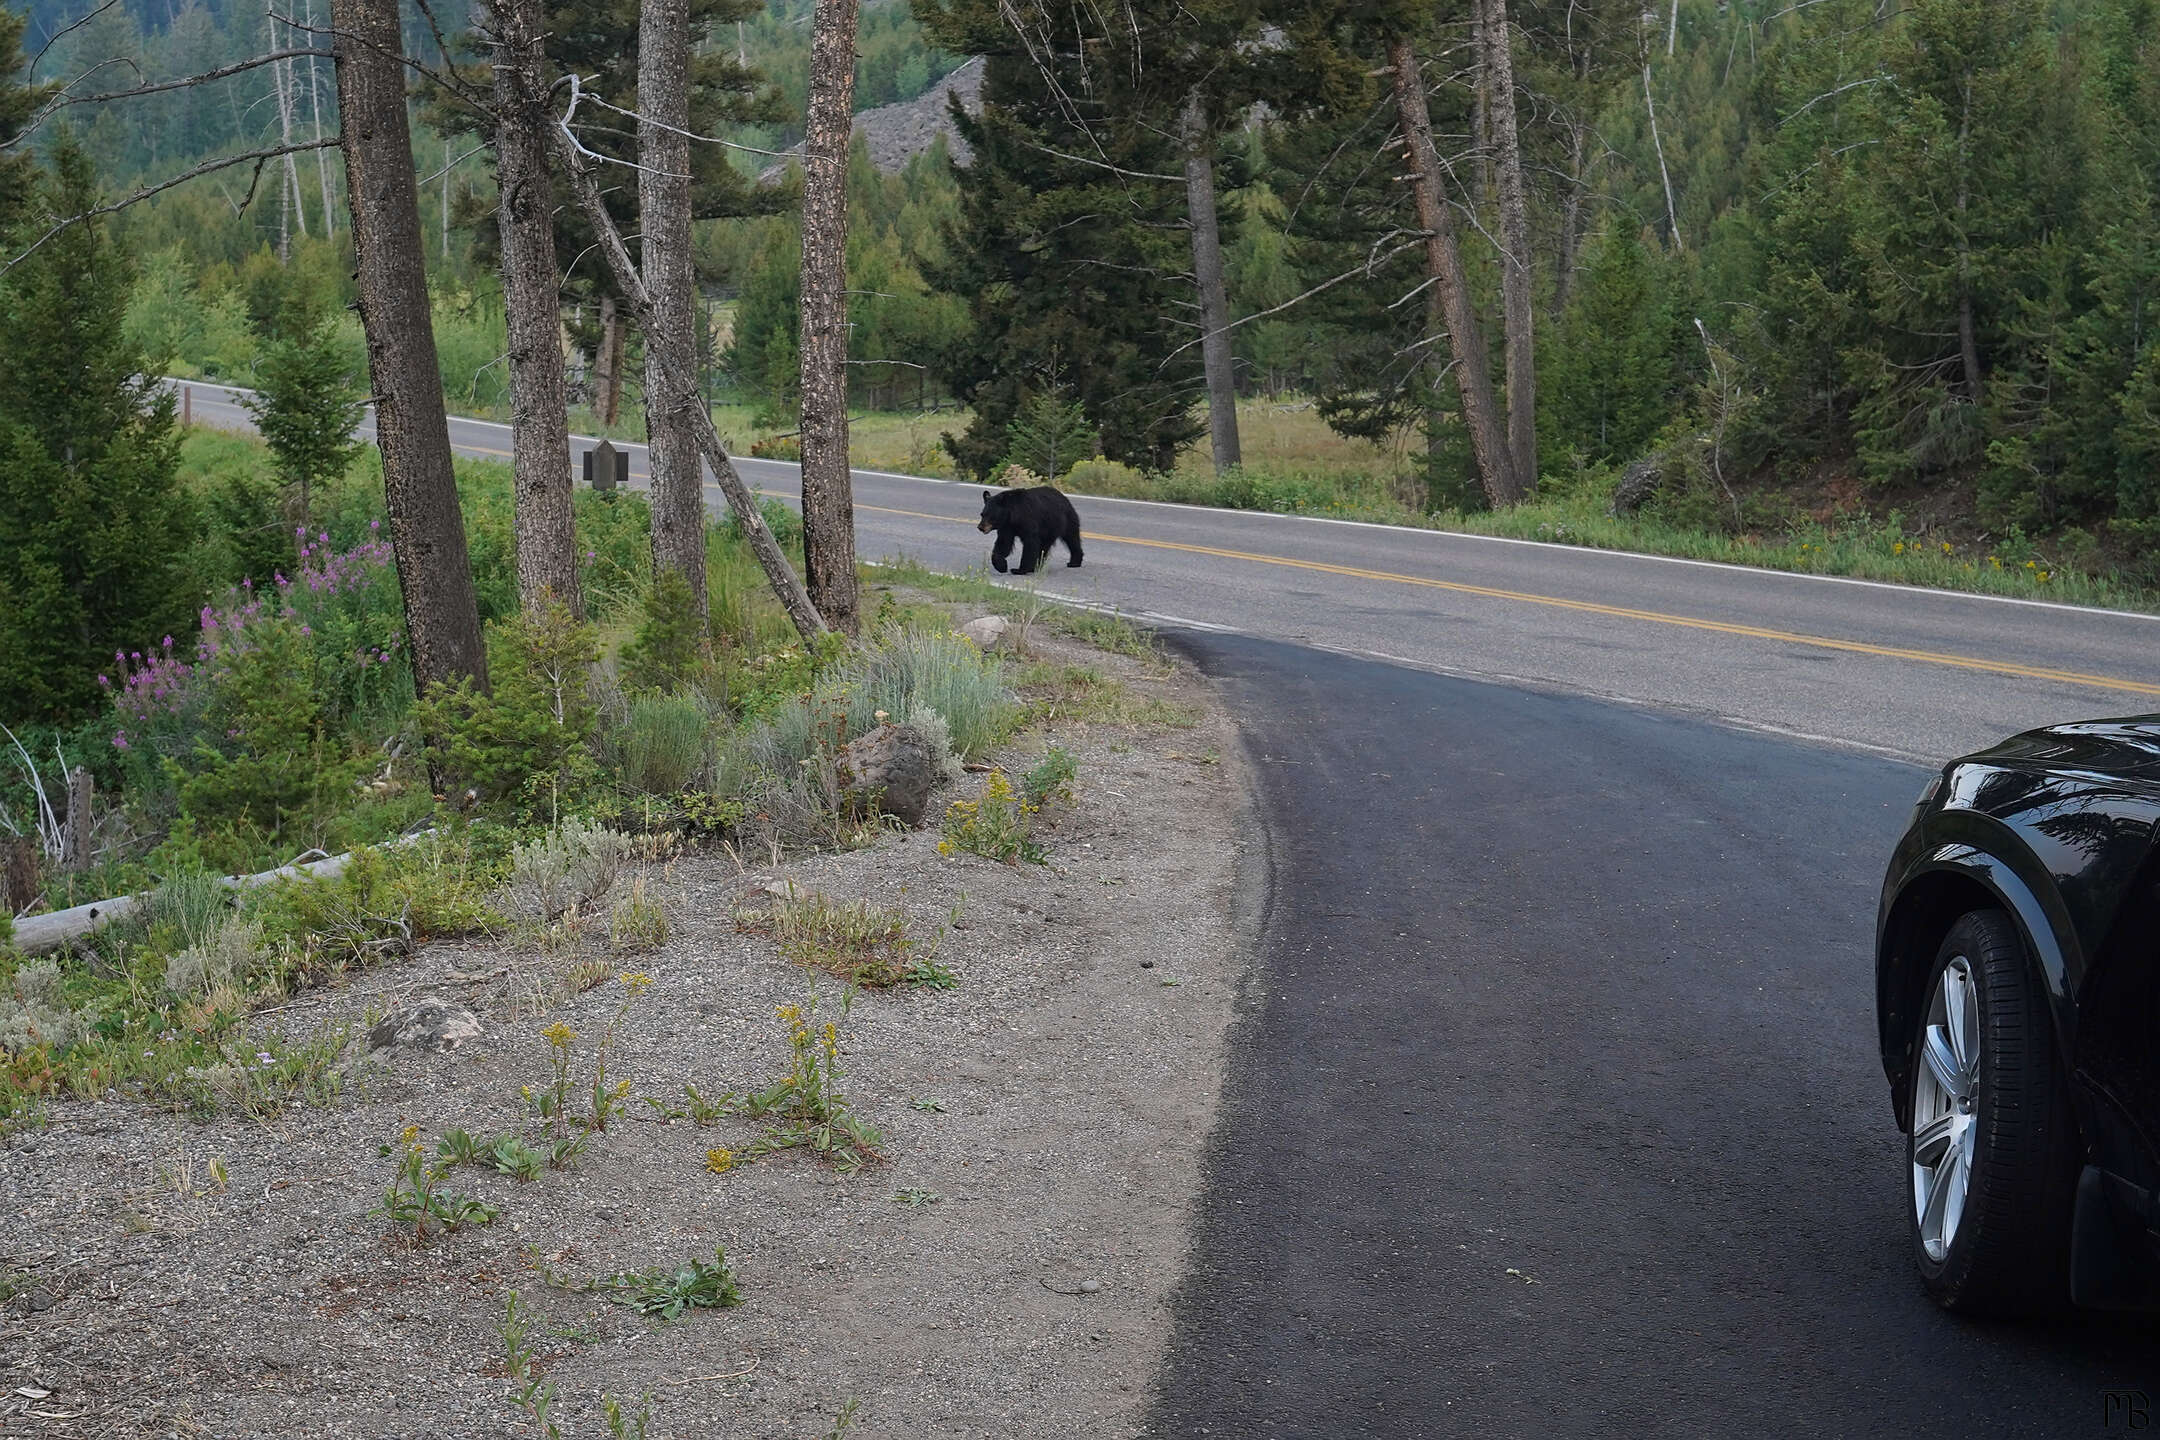 A black bear on the road